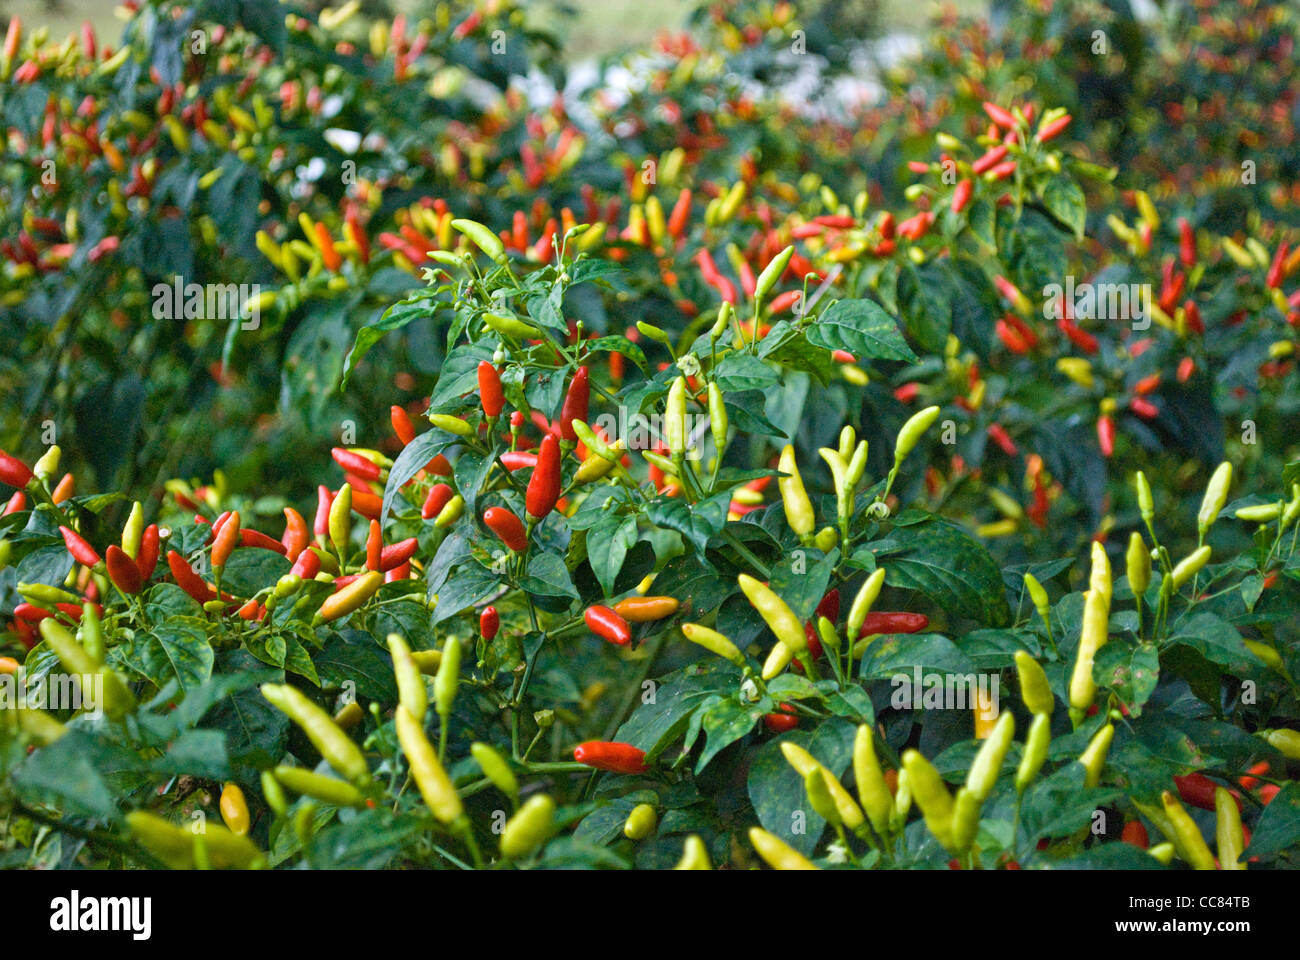 Chillies growing in Zambia. Chillies are used locally as an elephant deterrent. Stock Photo